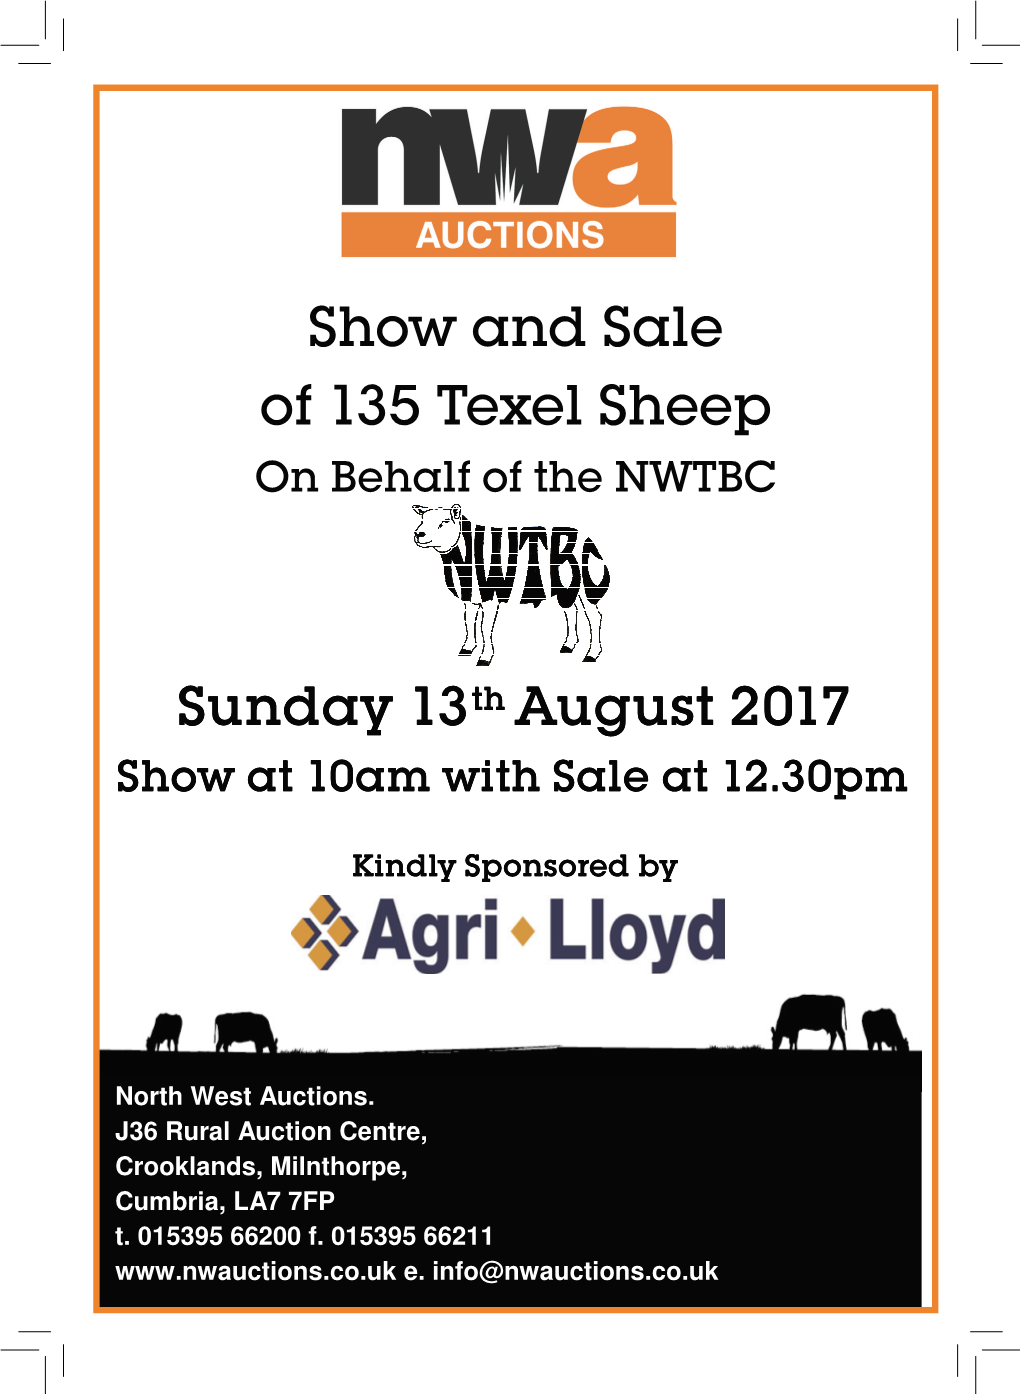 Show and Sale of 135 Texel Sheep on Behalf of NWTBC